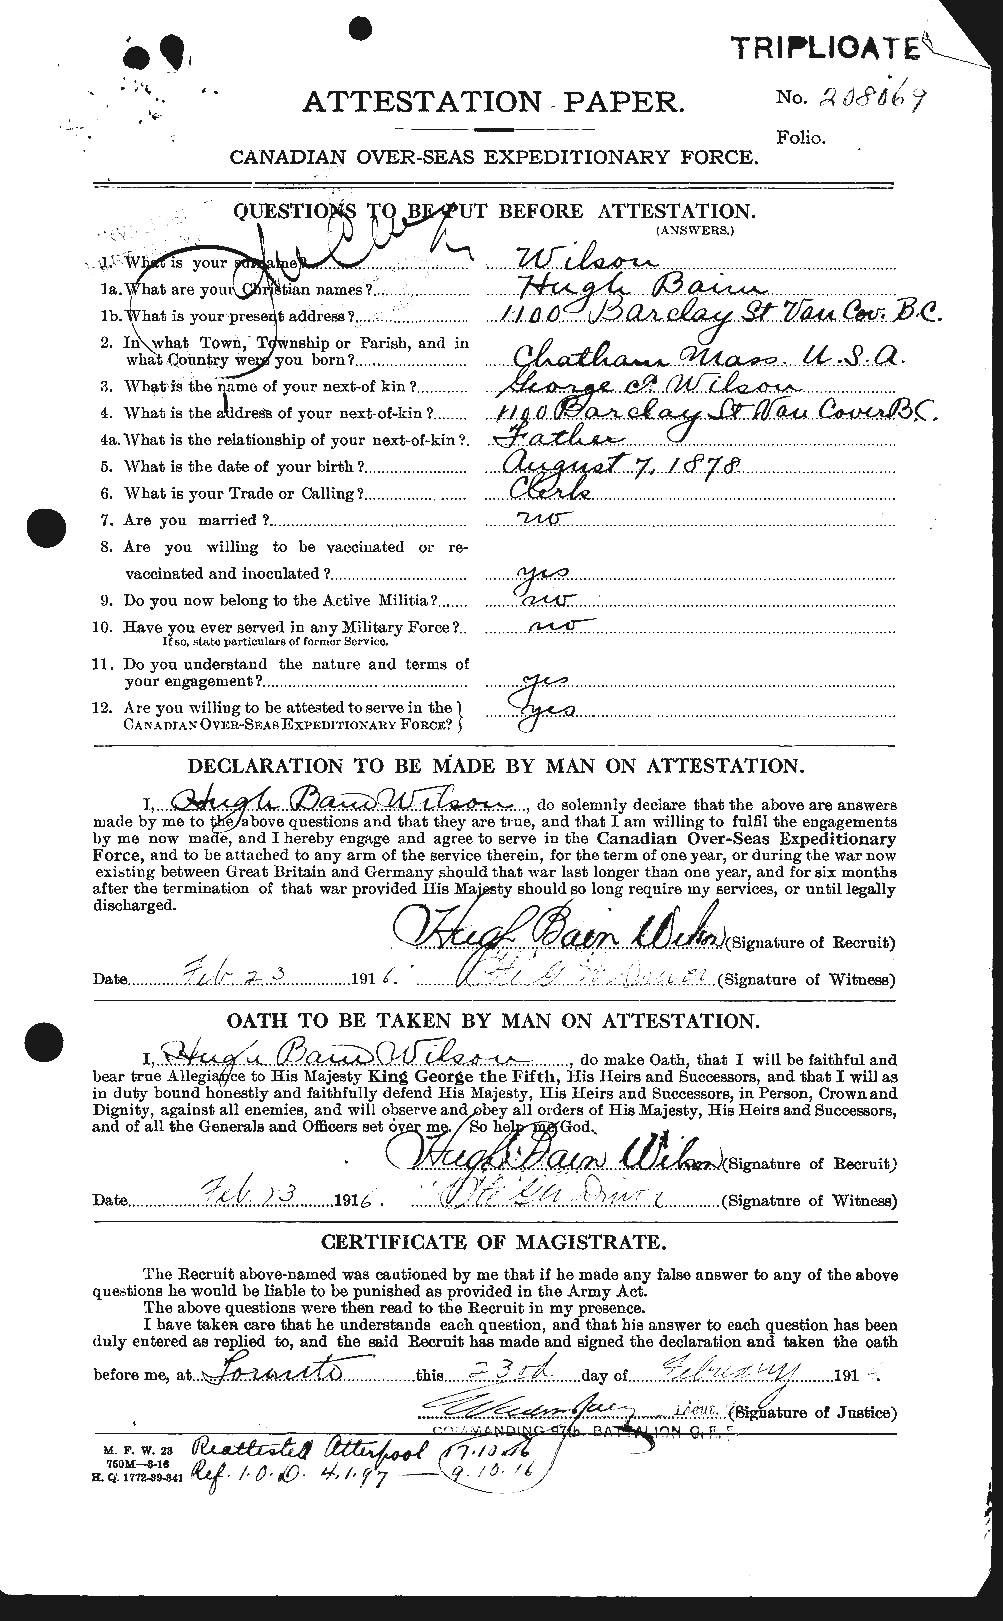 Personnel Records of the First World War - CEF 679606a